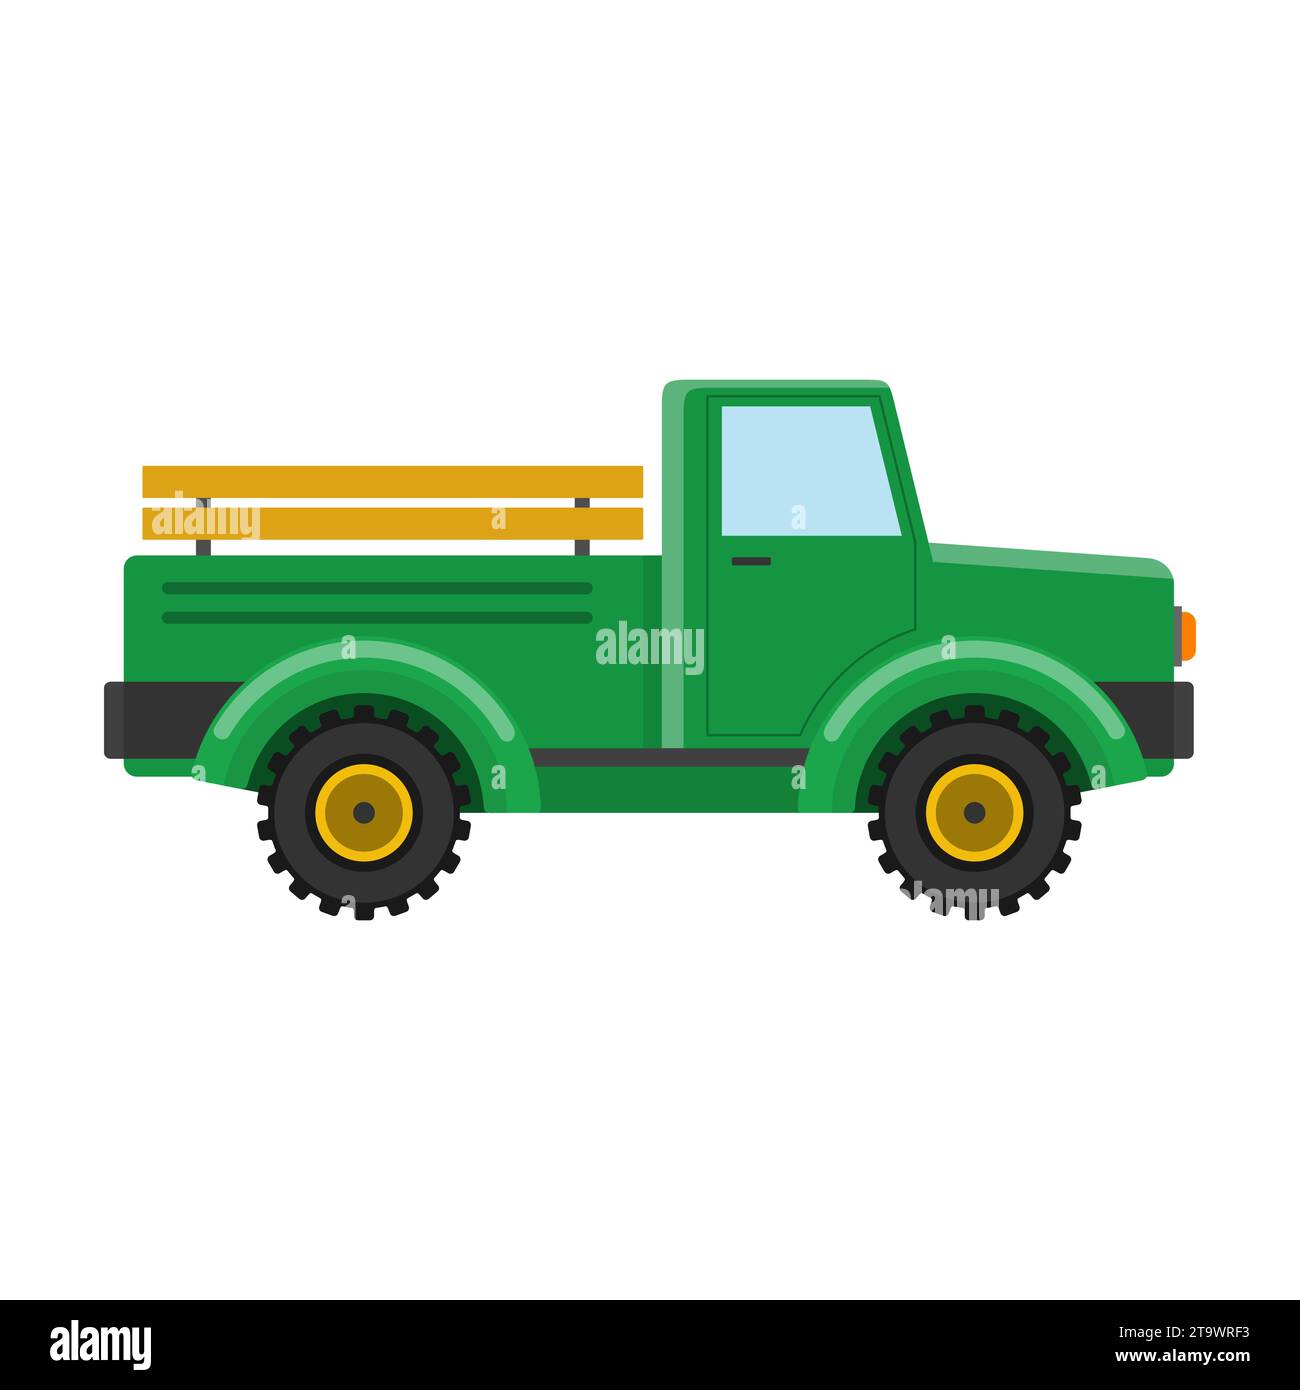 Retro pickup truck isolated on white background. Classic farming vehicles for transportation and hauling production. Vintage transport car Stock Vector